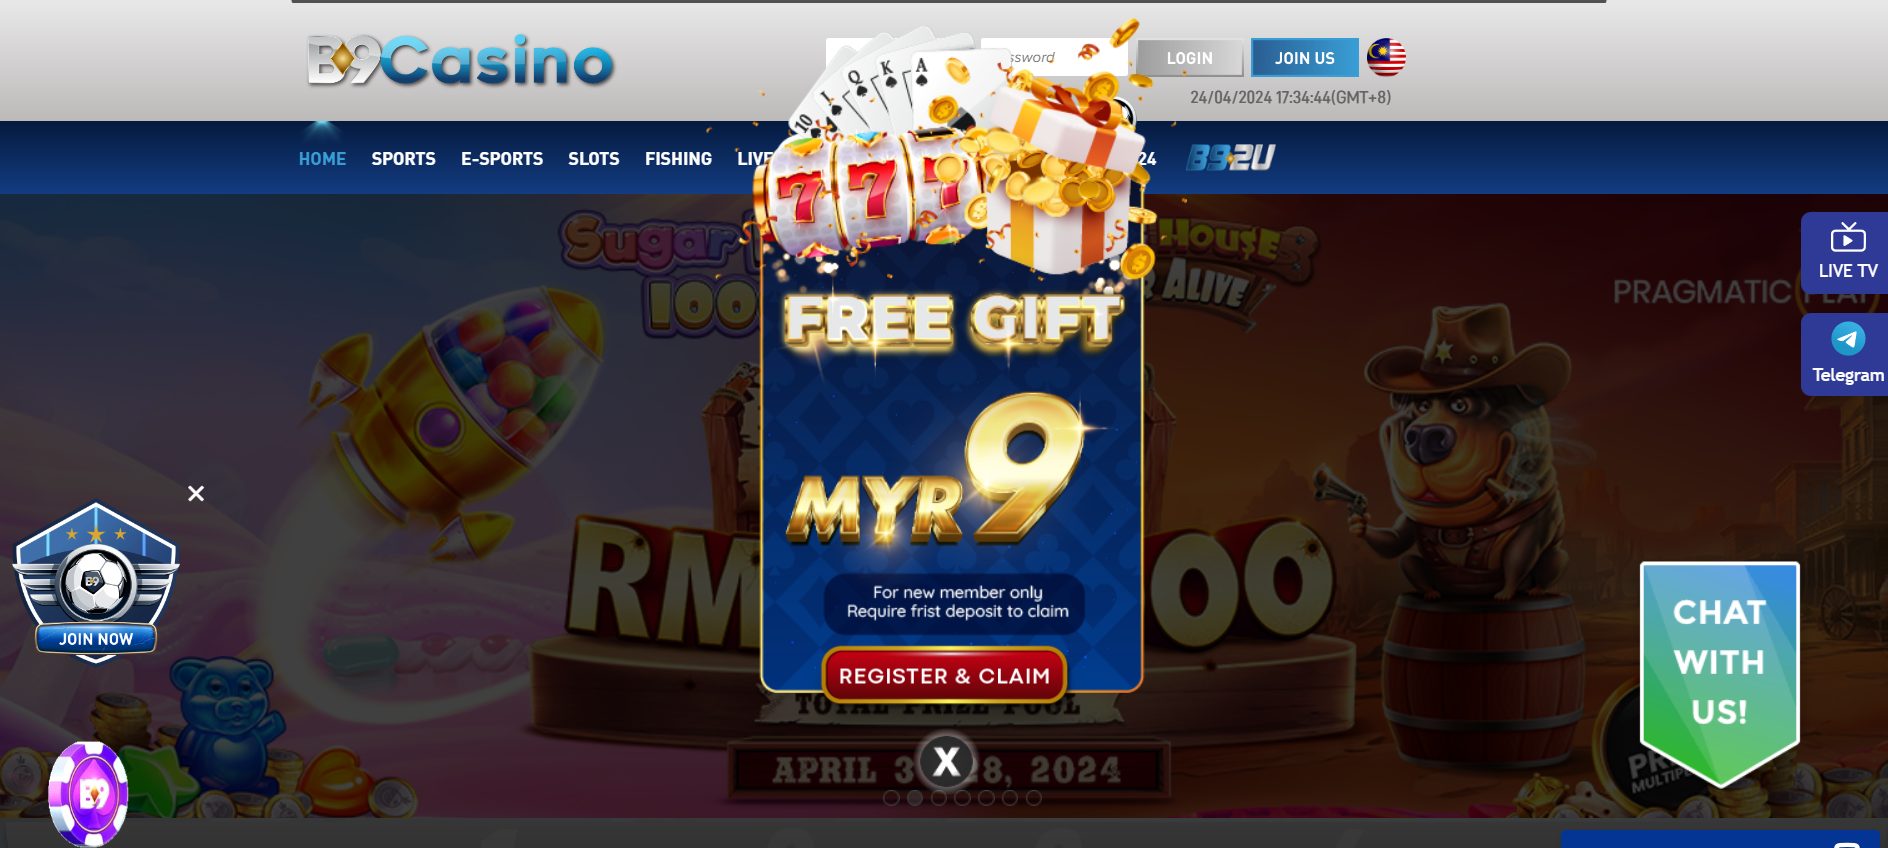 Besides the live casino welcome offer, new B9Casino players are entitled to a no-deposit MYR9 offer right after registration.